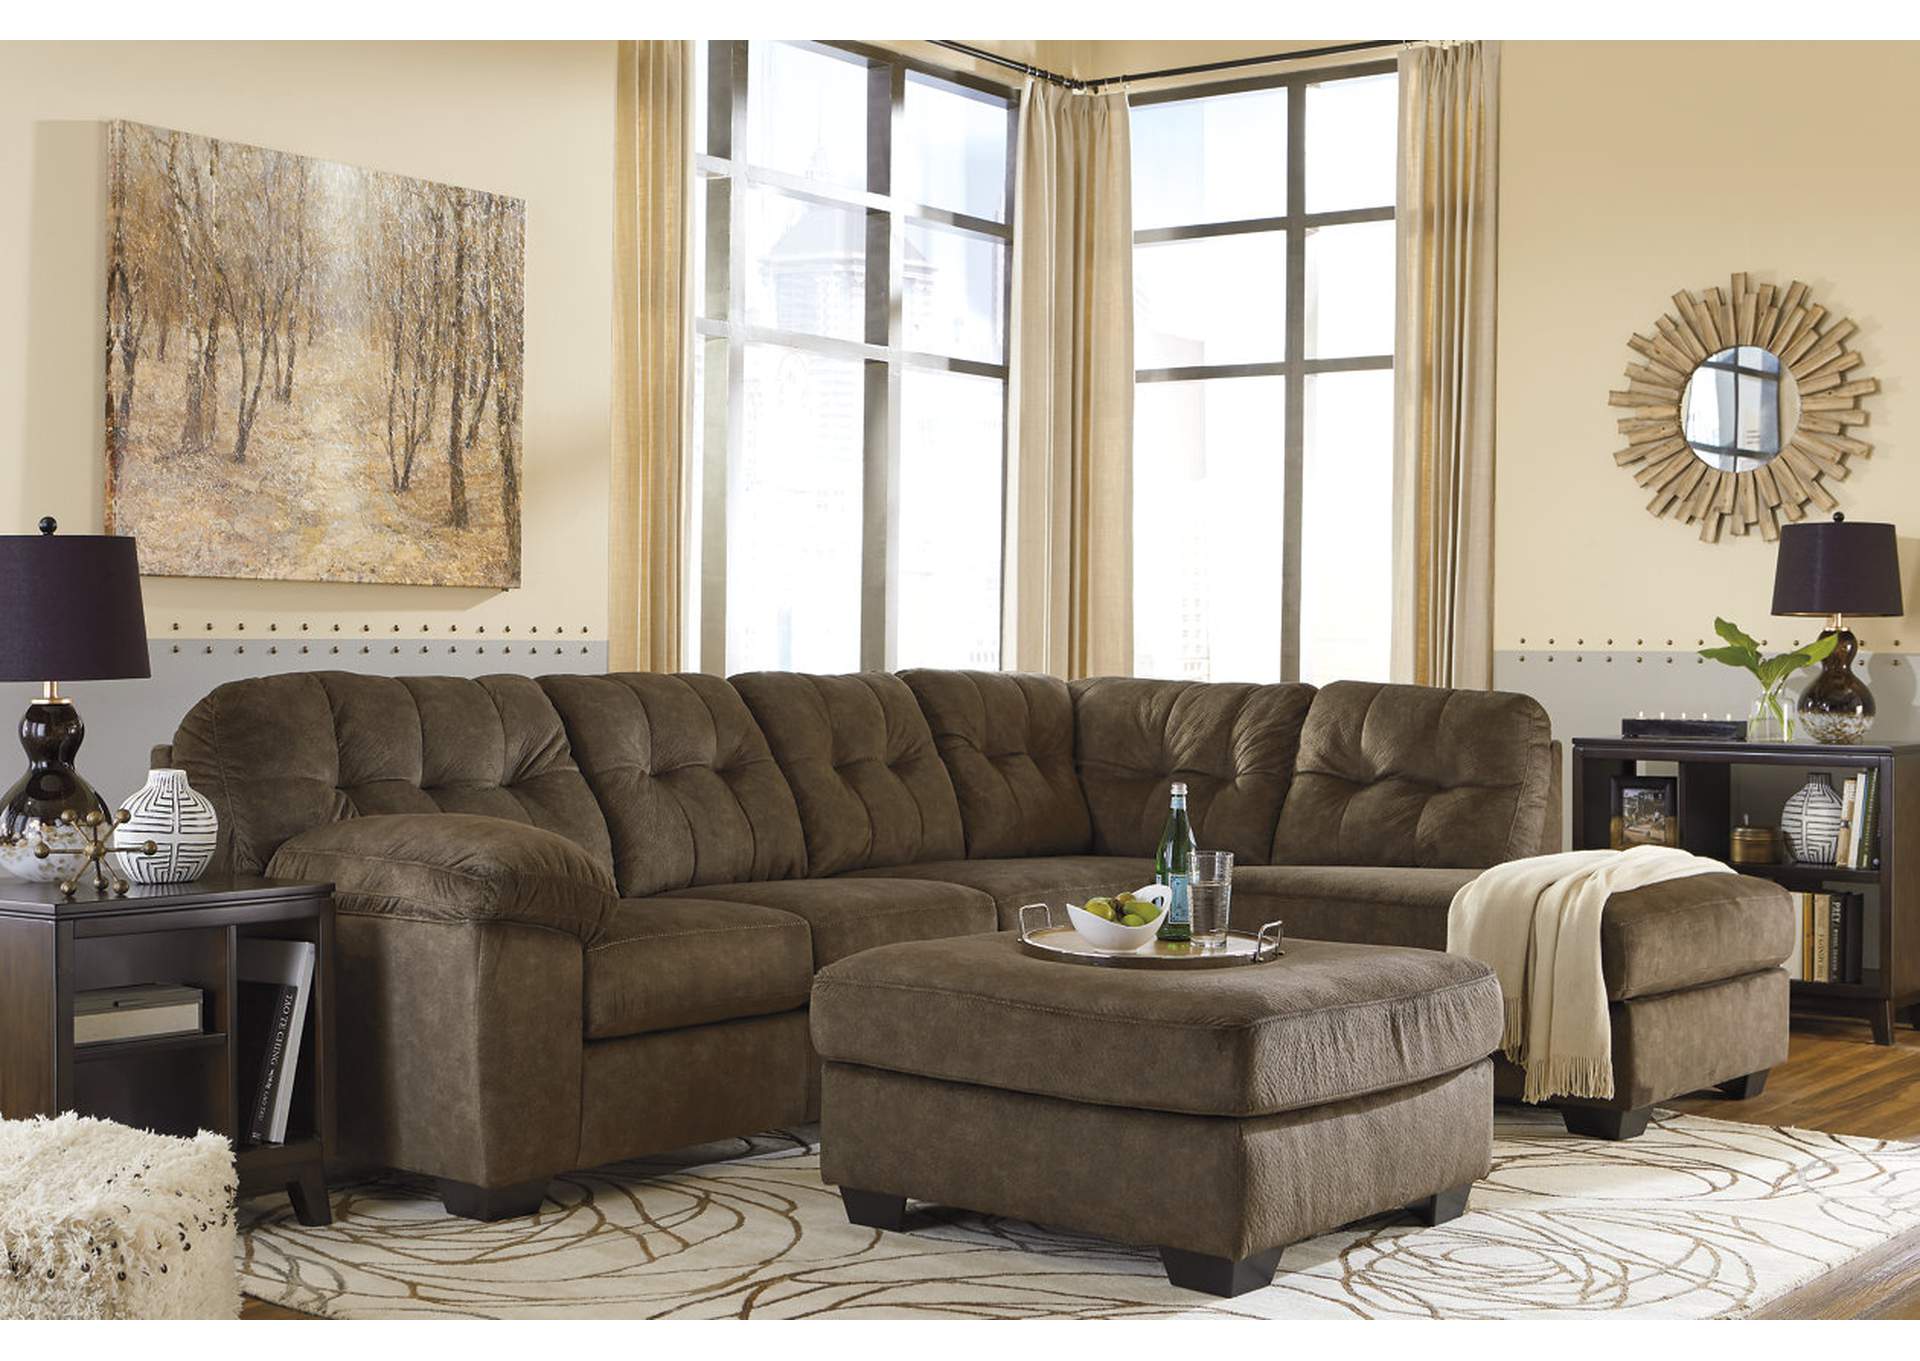 Accrington 2-Piece Sleeper Sectional with Chaise,Signature Design By Ashley